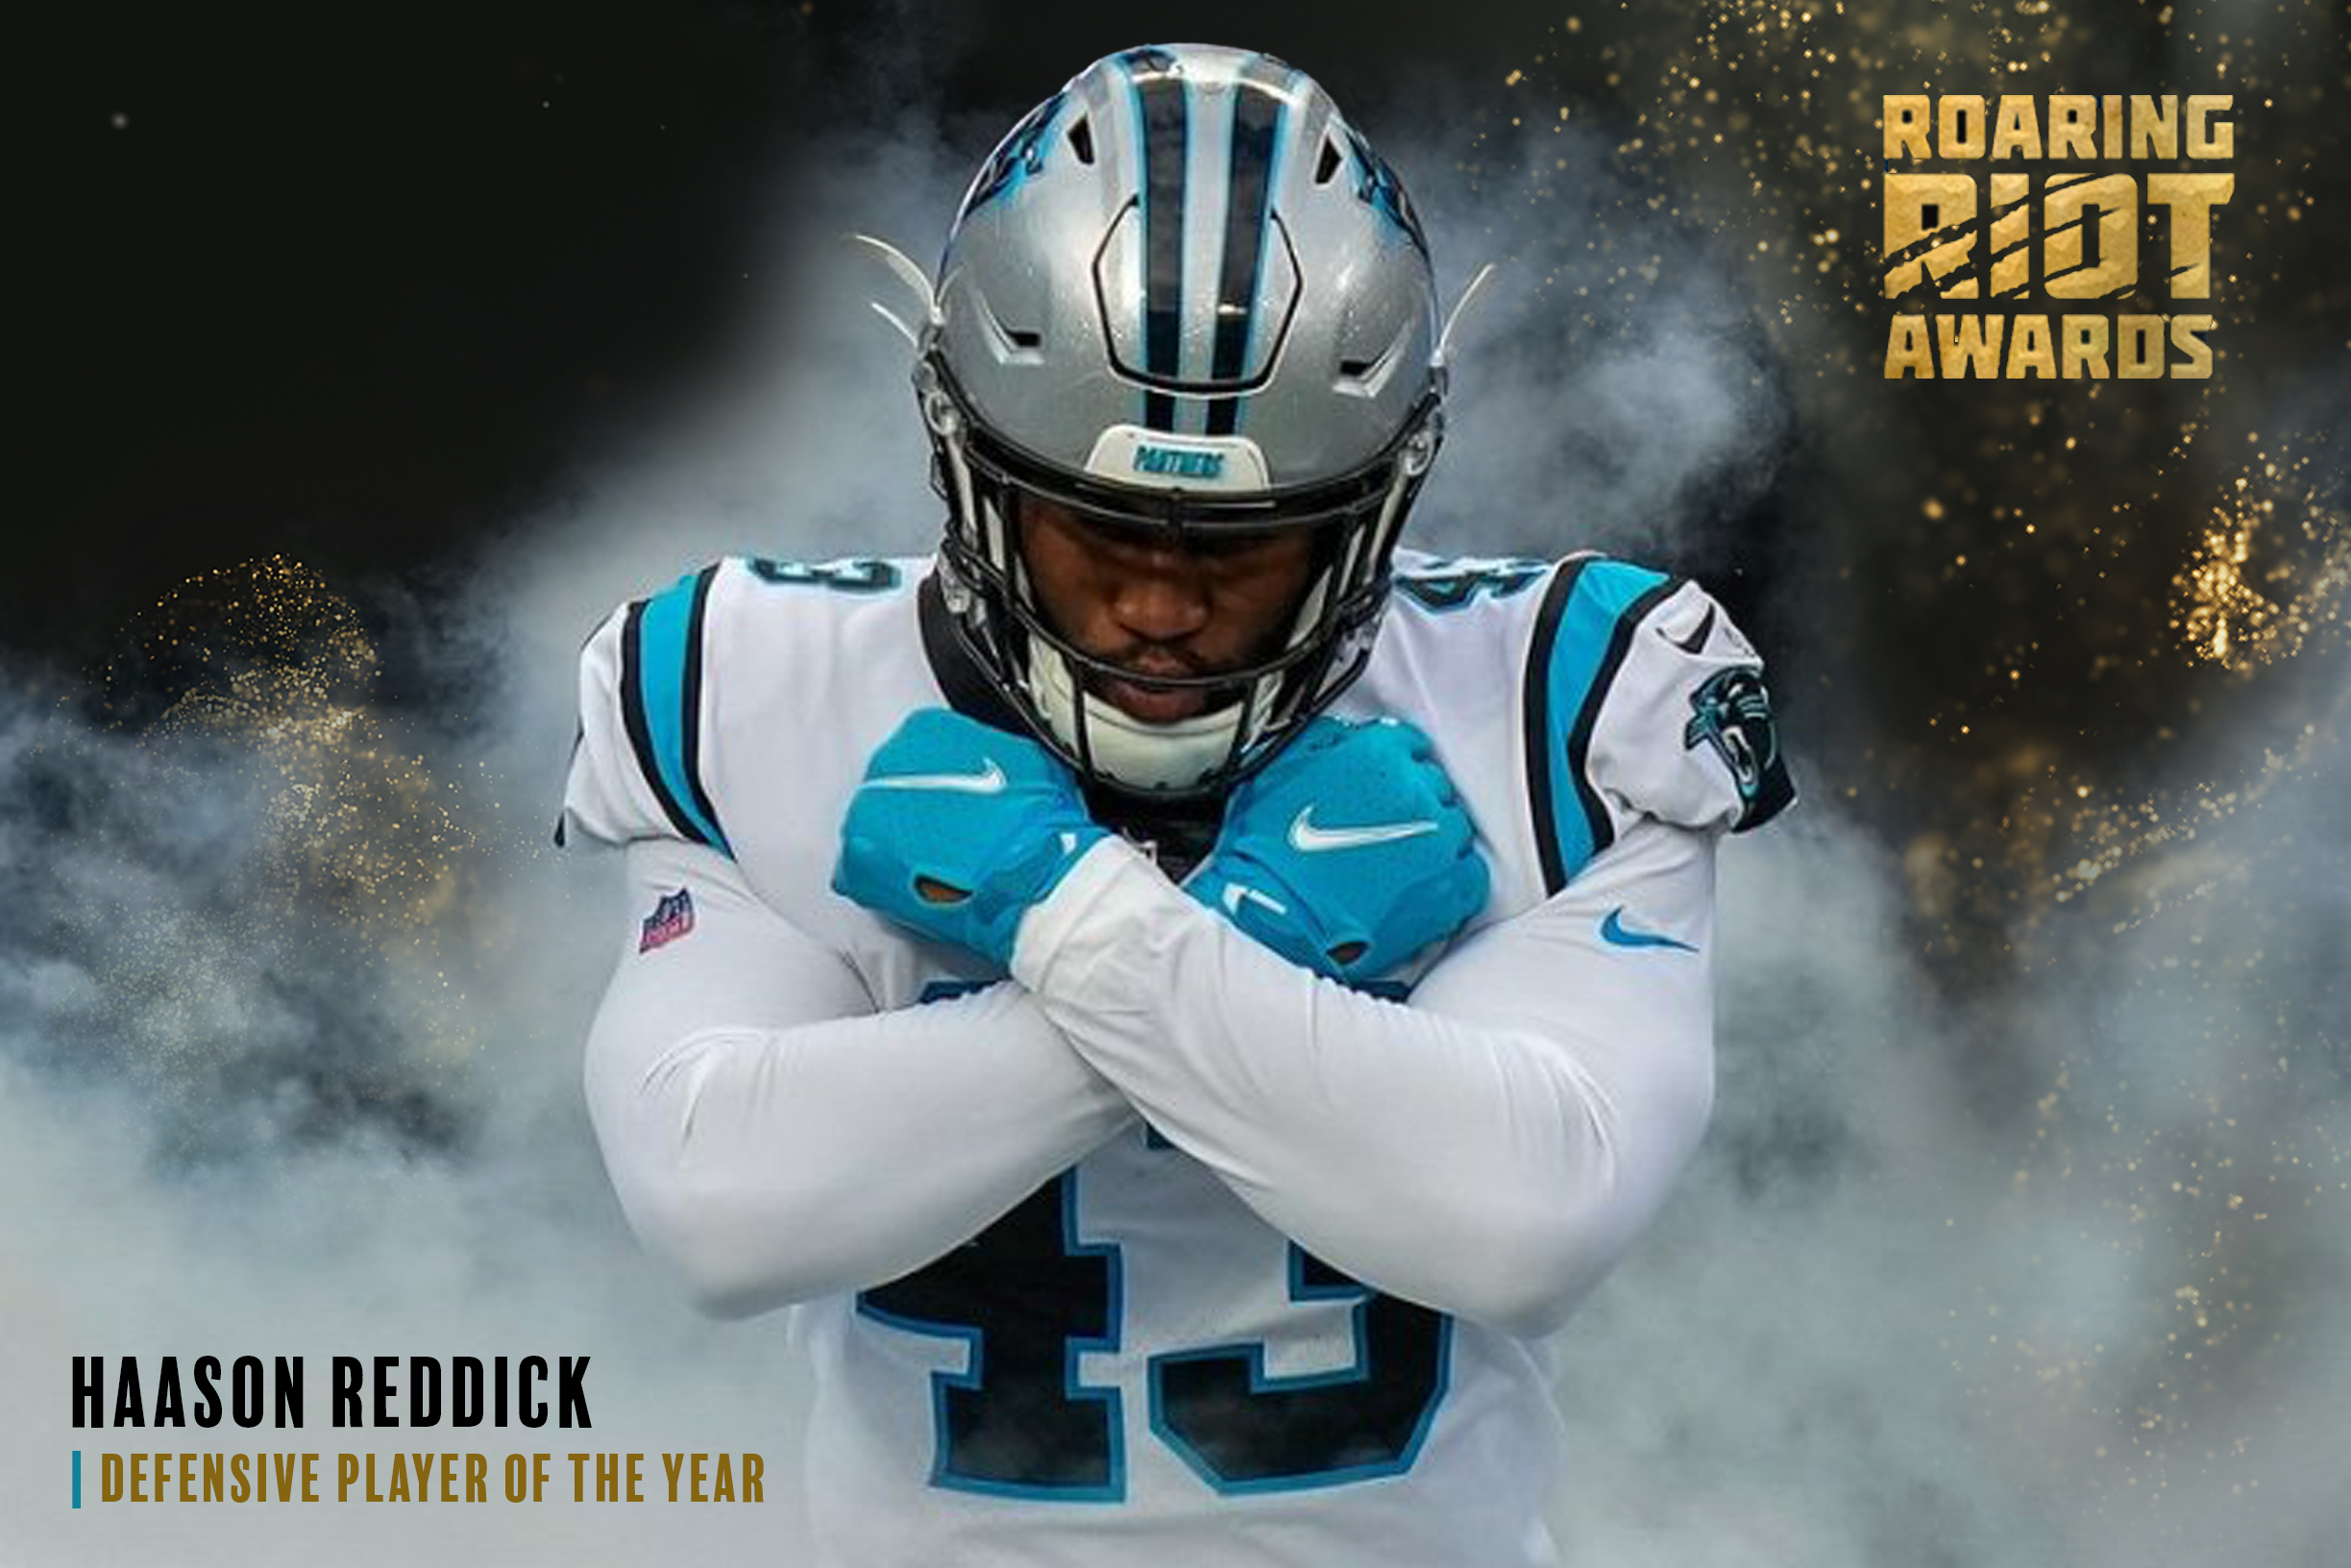 Haason Reddick Is Roaring Riot’s 2021 Defensive Player Of The Year